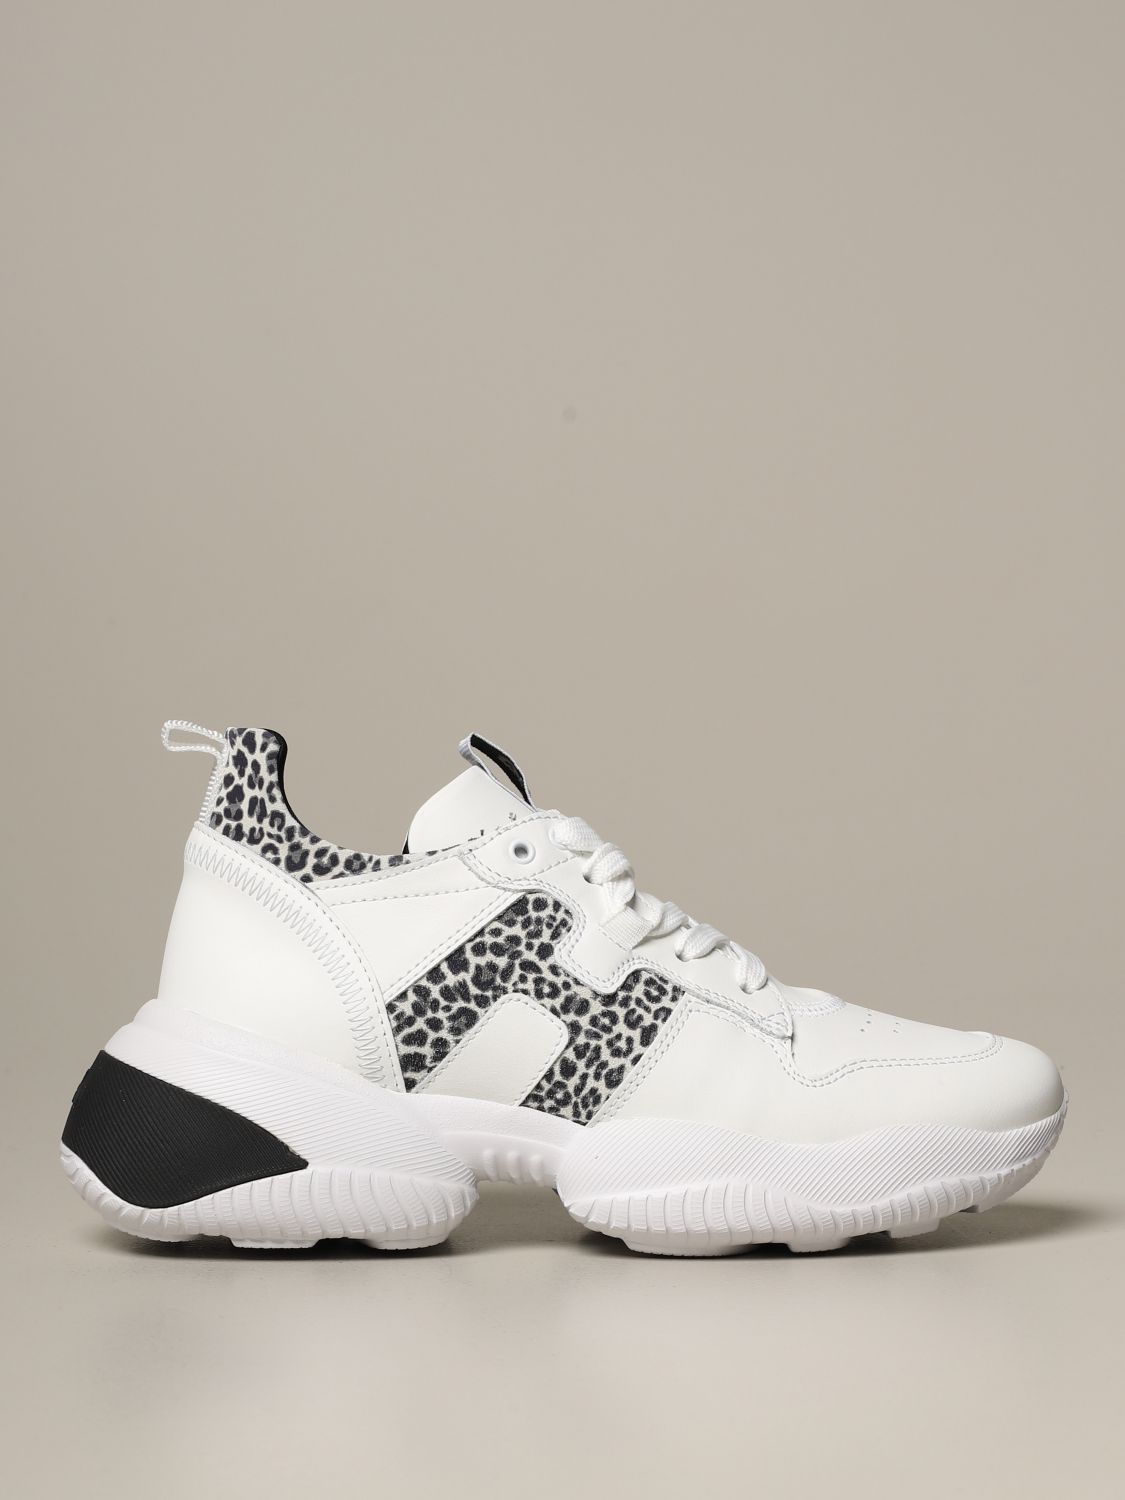 Interaction Hogan x Giglio.com sneakers in animalier leather and suede |  Sneakers Hogan Women White | Sneakers Hogan HXW5250CW72 OPF Giglio EN